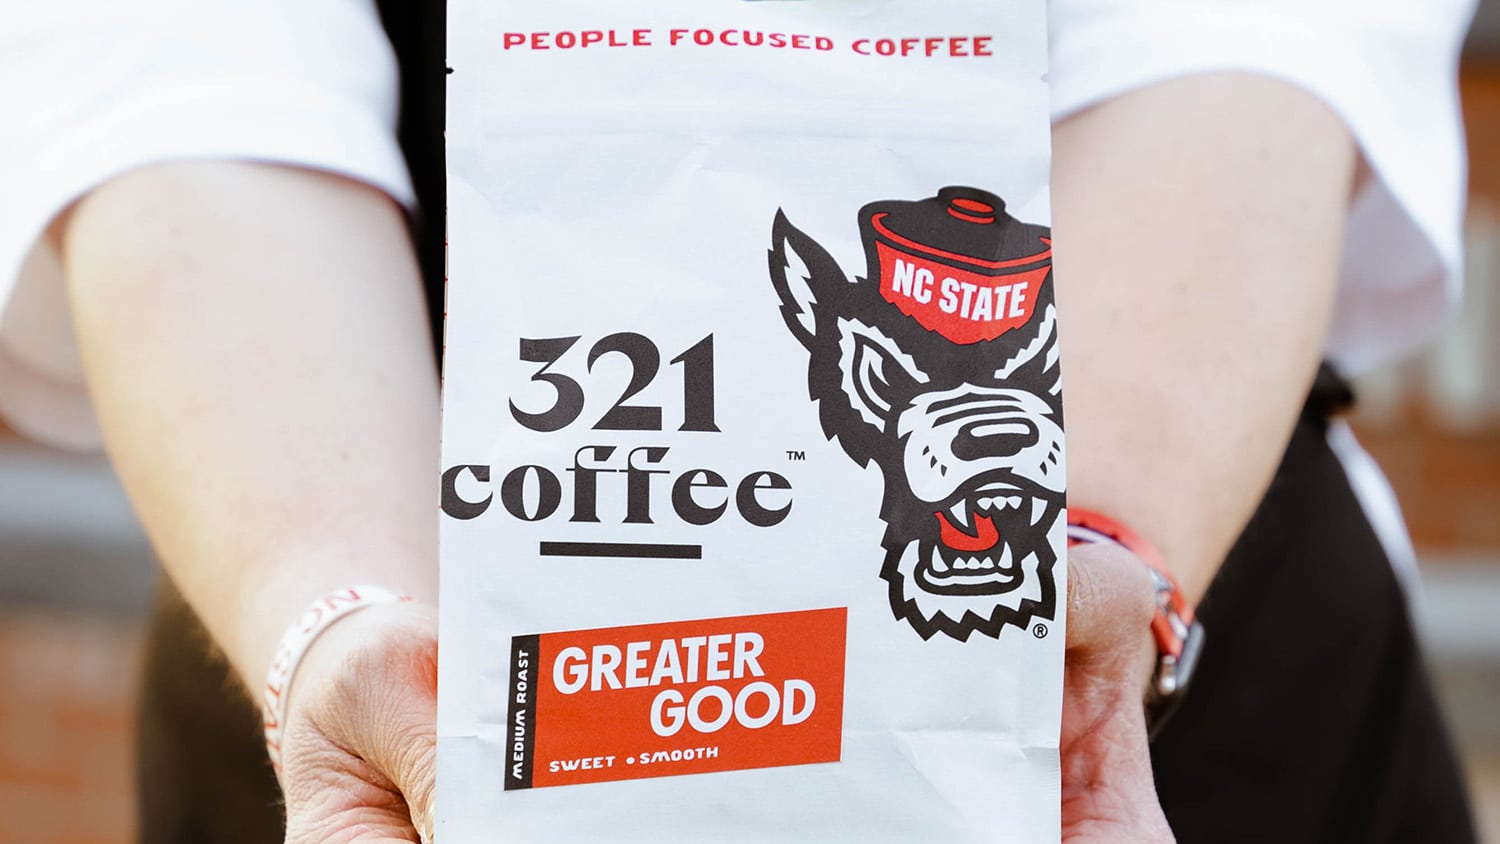 A 321 Coffee employee holds up a bag of Greater Good coffee